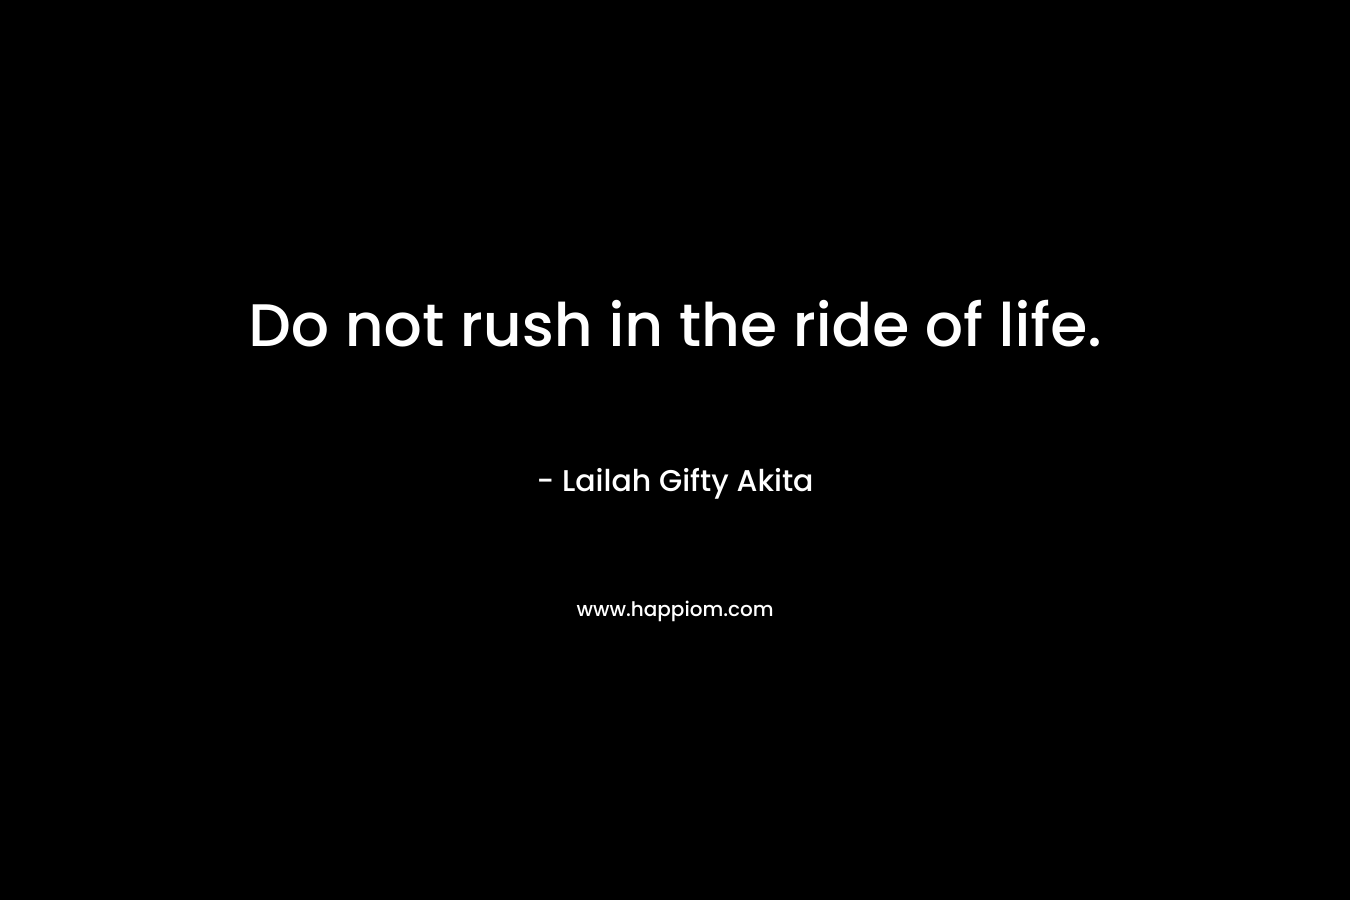 Do not rush in the ride of life.